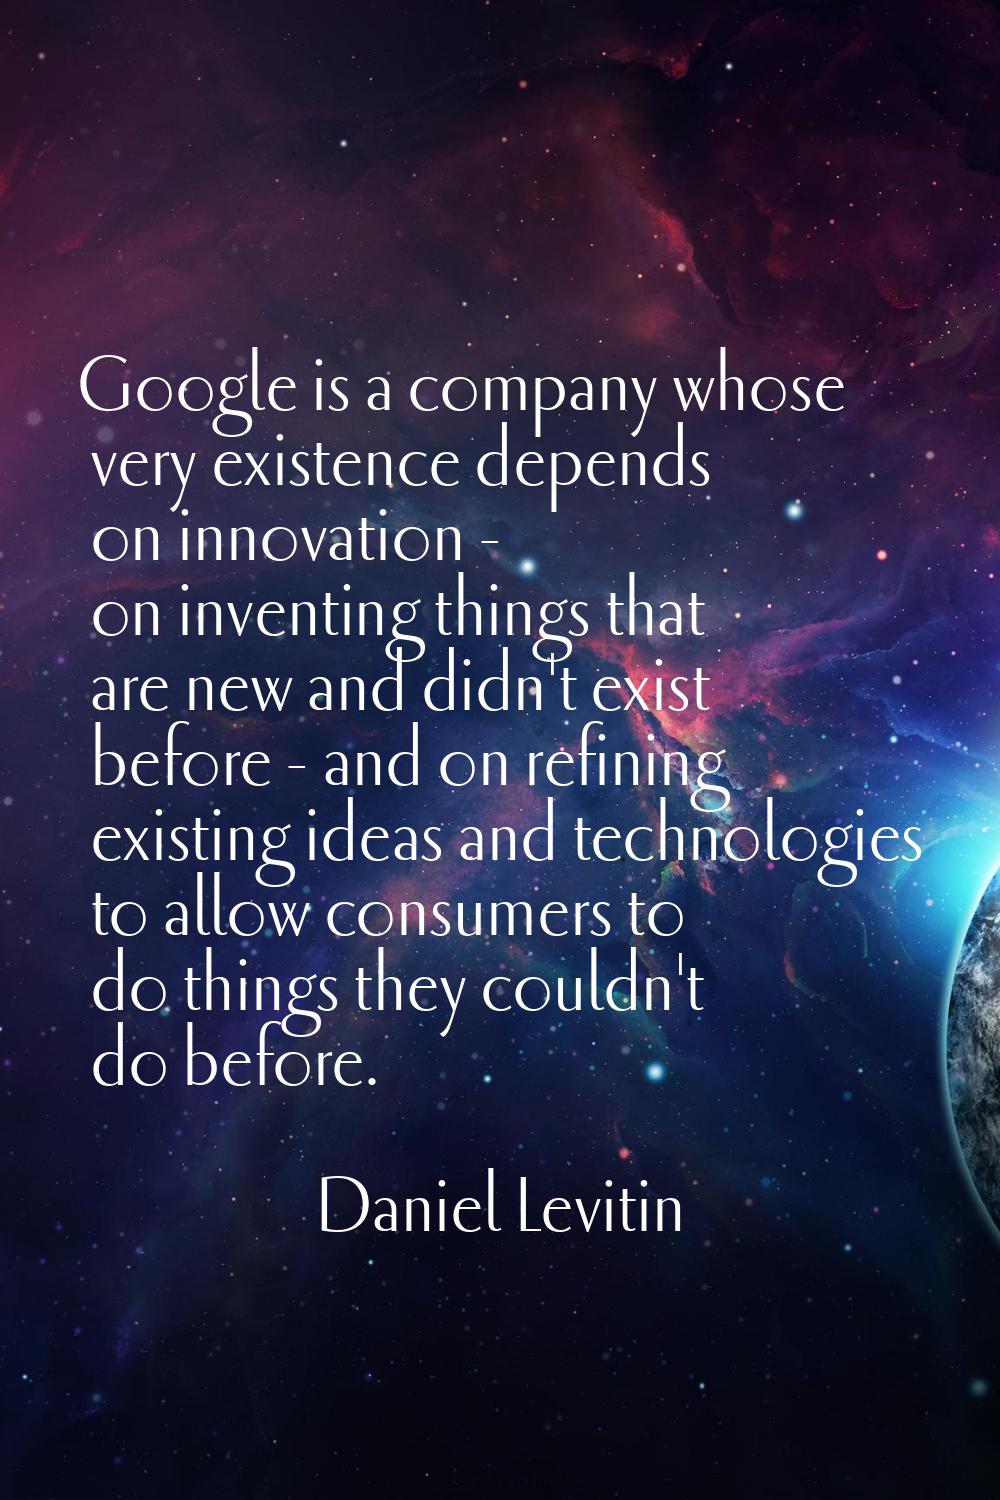 Google is a company whose very existence depends on innovation - on inventing things that are new a